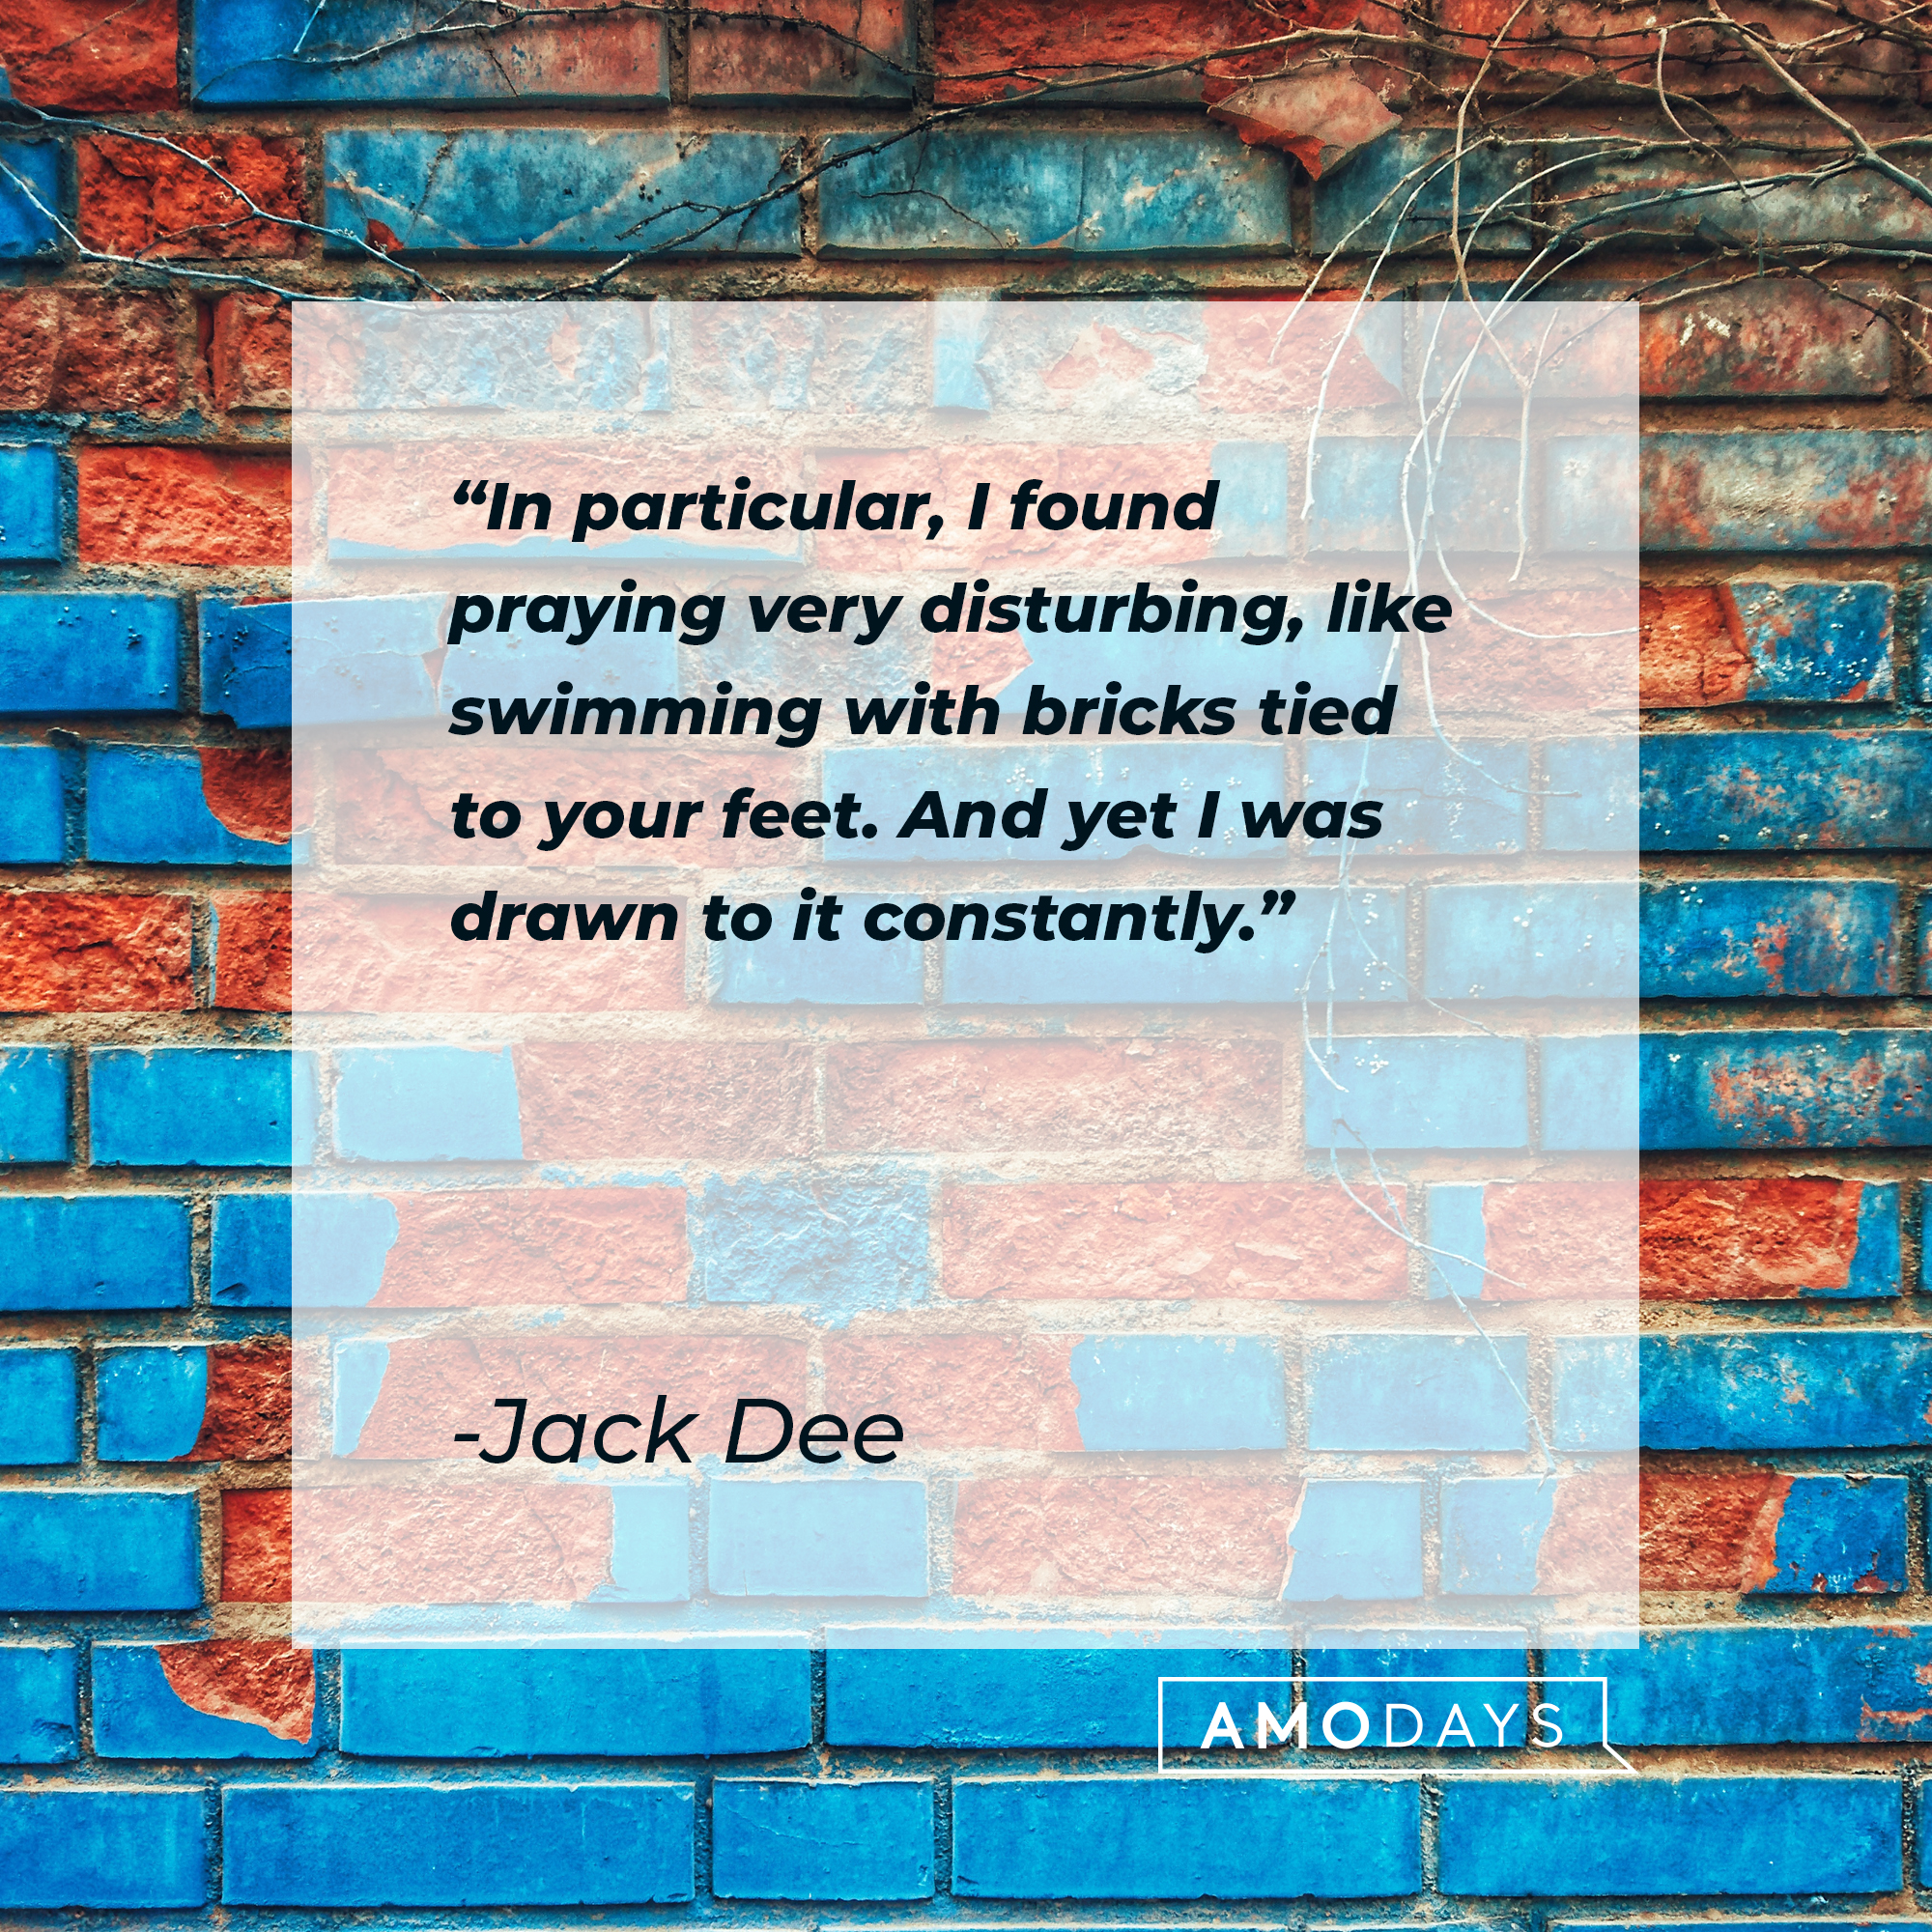 Jack Dee's quote: "In particular, I found praying very disturbing, like swimming with bricks tied to your feet. And yet I was drawn to it constantly." | Source: Unsplash